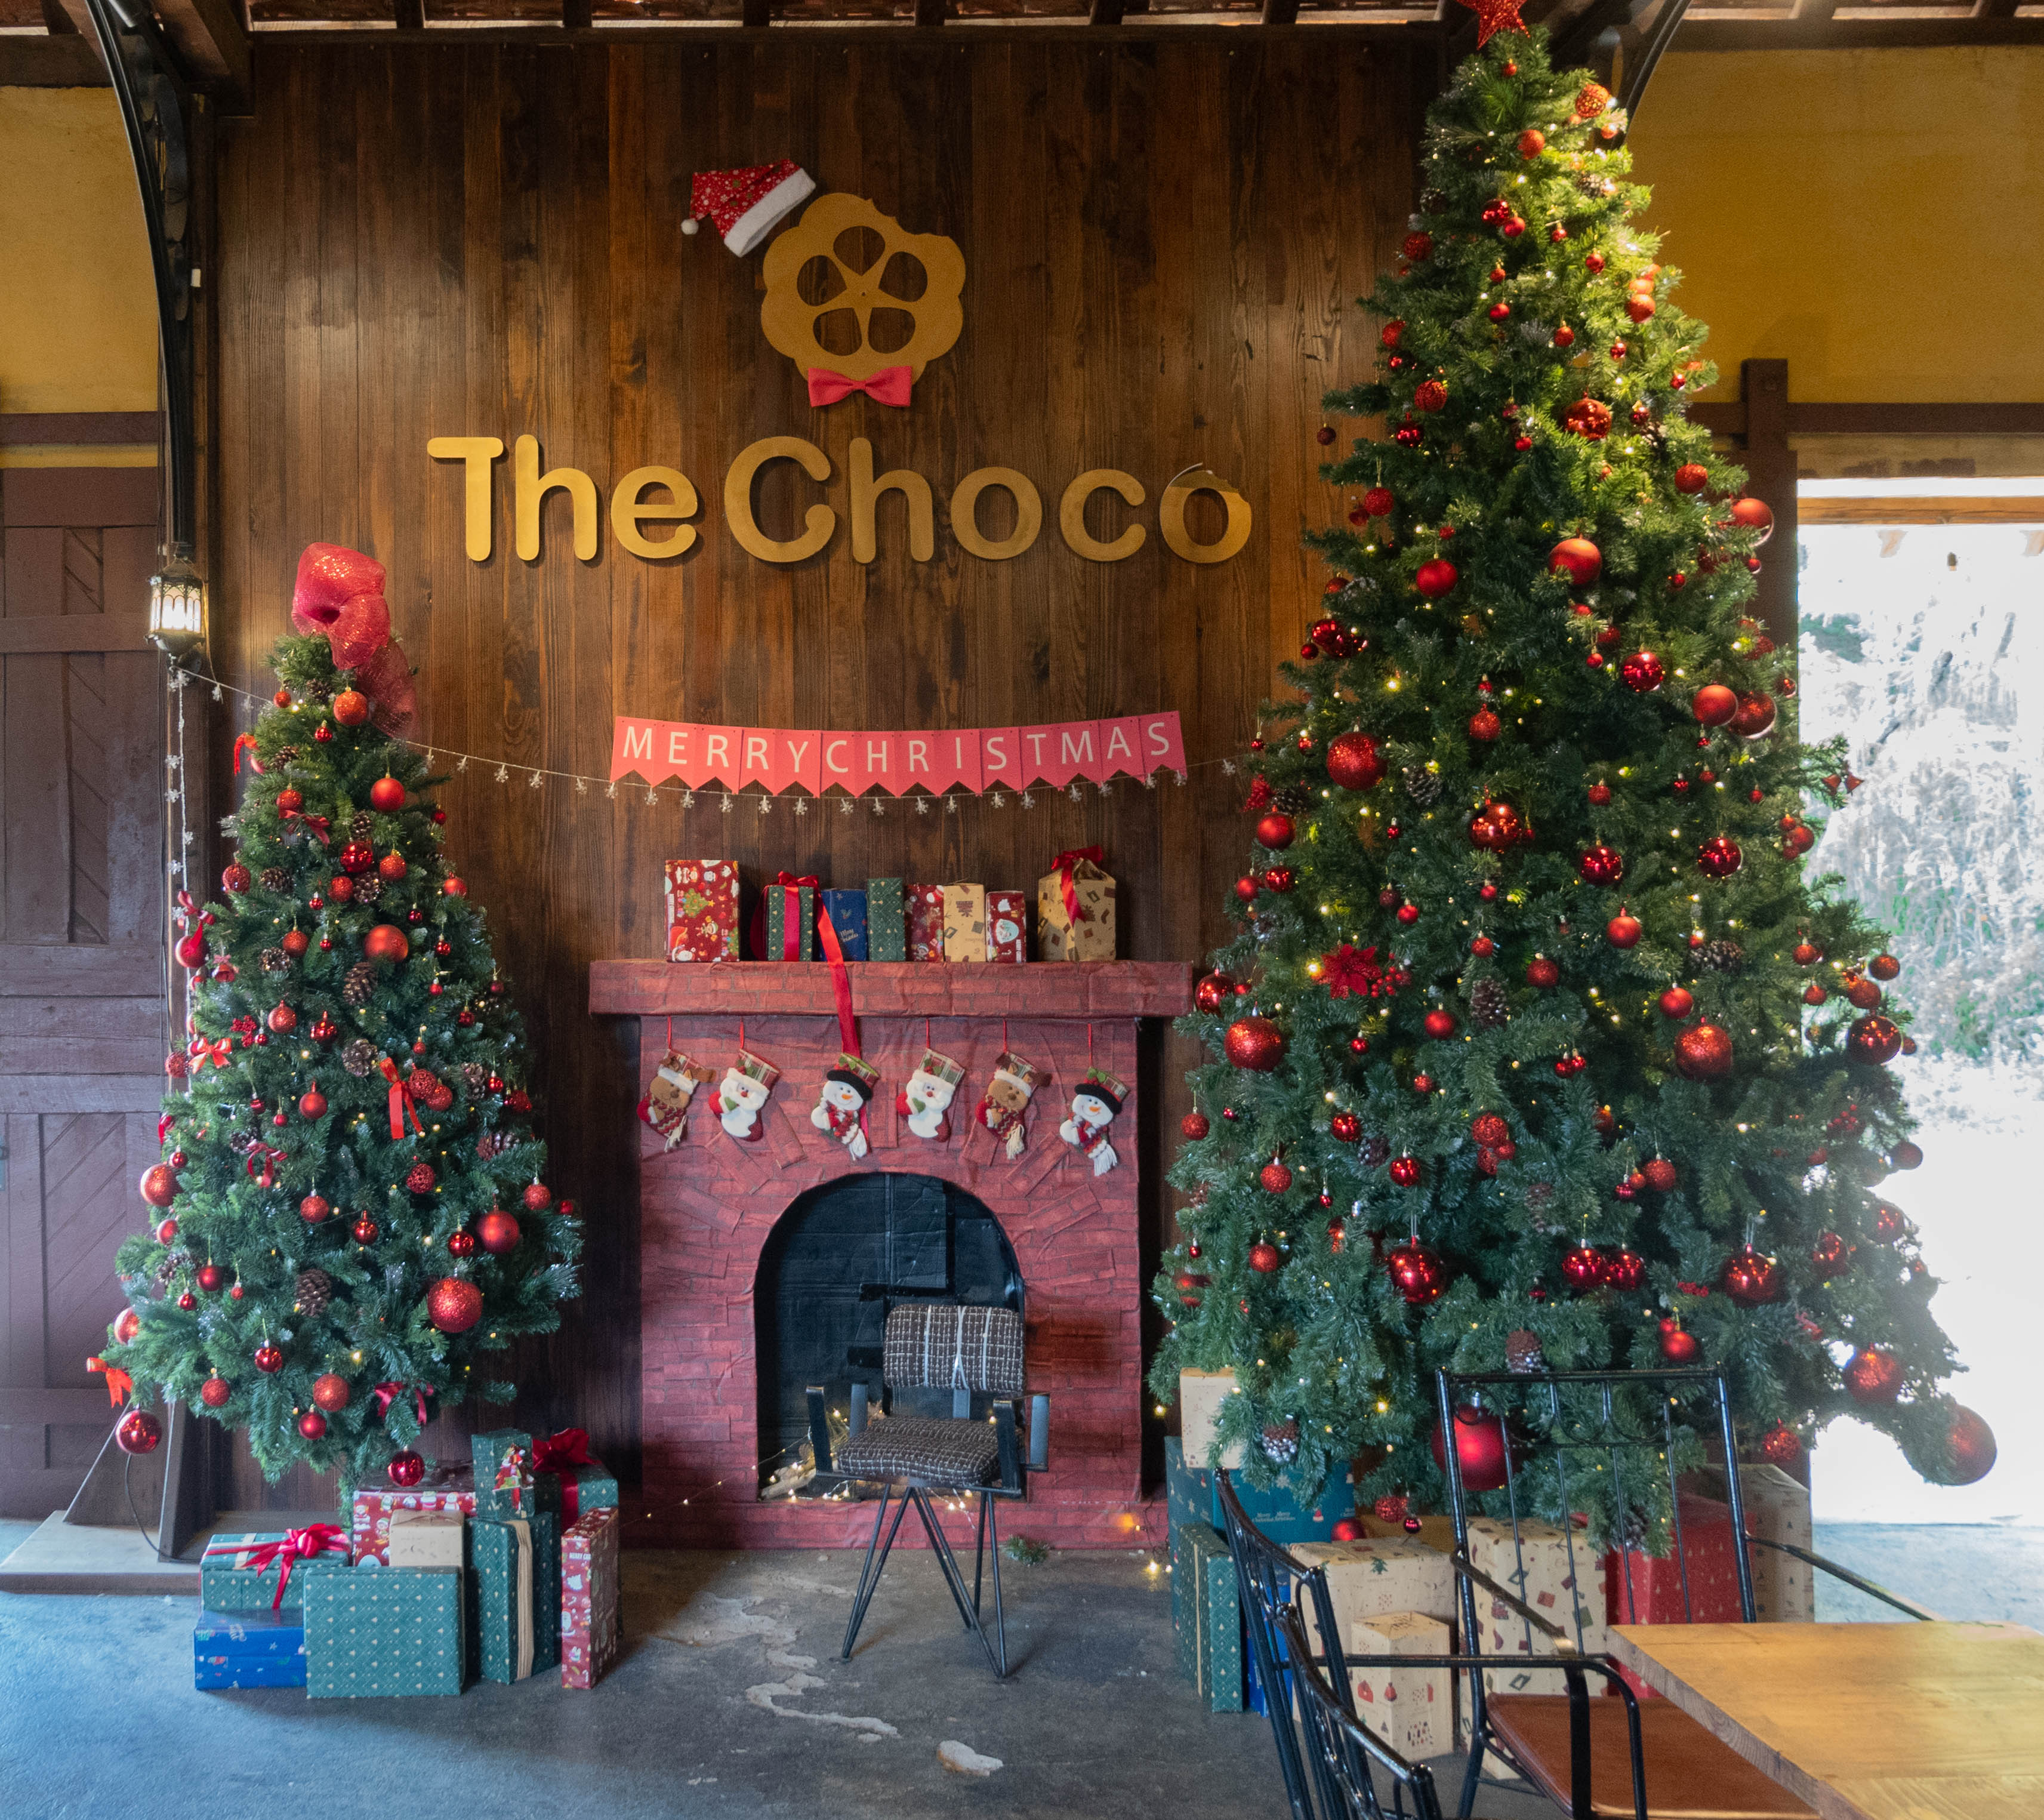 In the center fo the picture is the name "The Choco" under a symbol wearing a Santa Hat pointing to the left. Underneath the name The Chaco is a banner saying Merry Christmas. Under that is a fireplace with stockings hung on the mantle and to the left of the fireplace is a medium sized decorated fake Chritmas tree and a larger one is to the right of the fireplace. There is a chair in front of the fireplace.